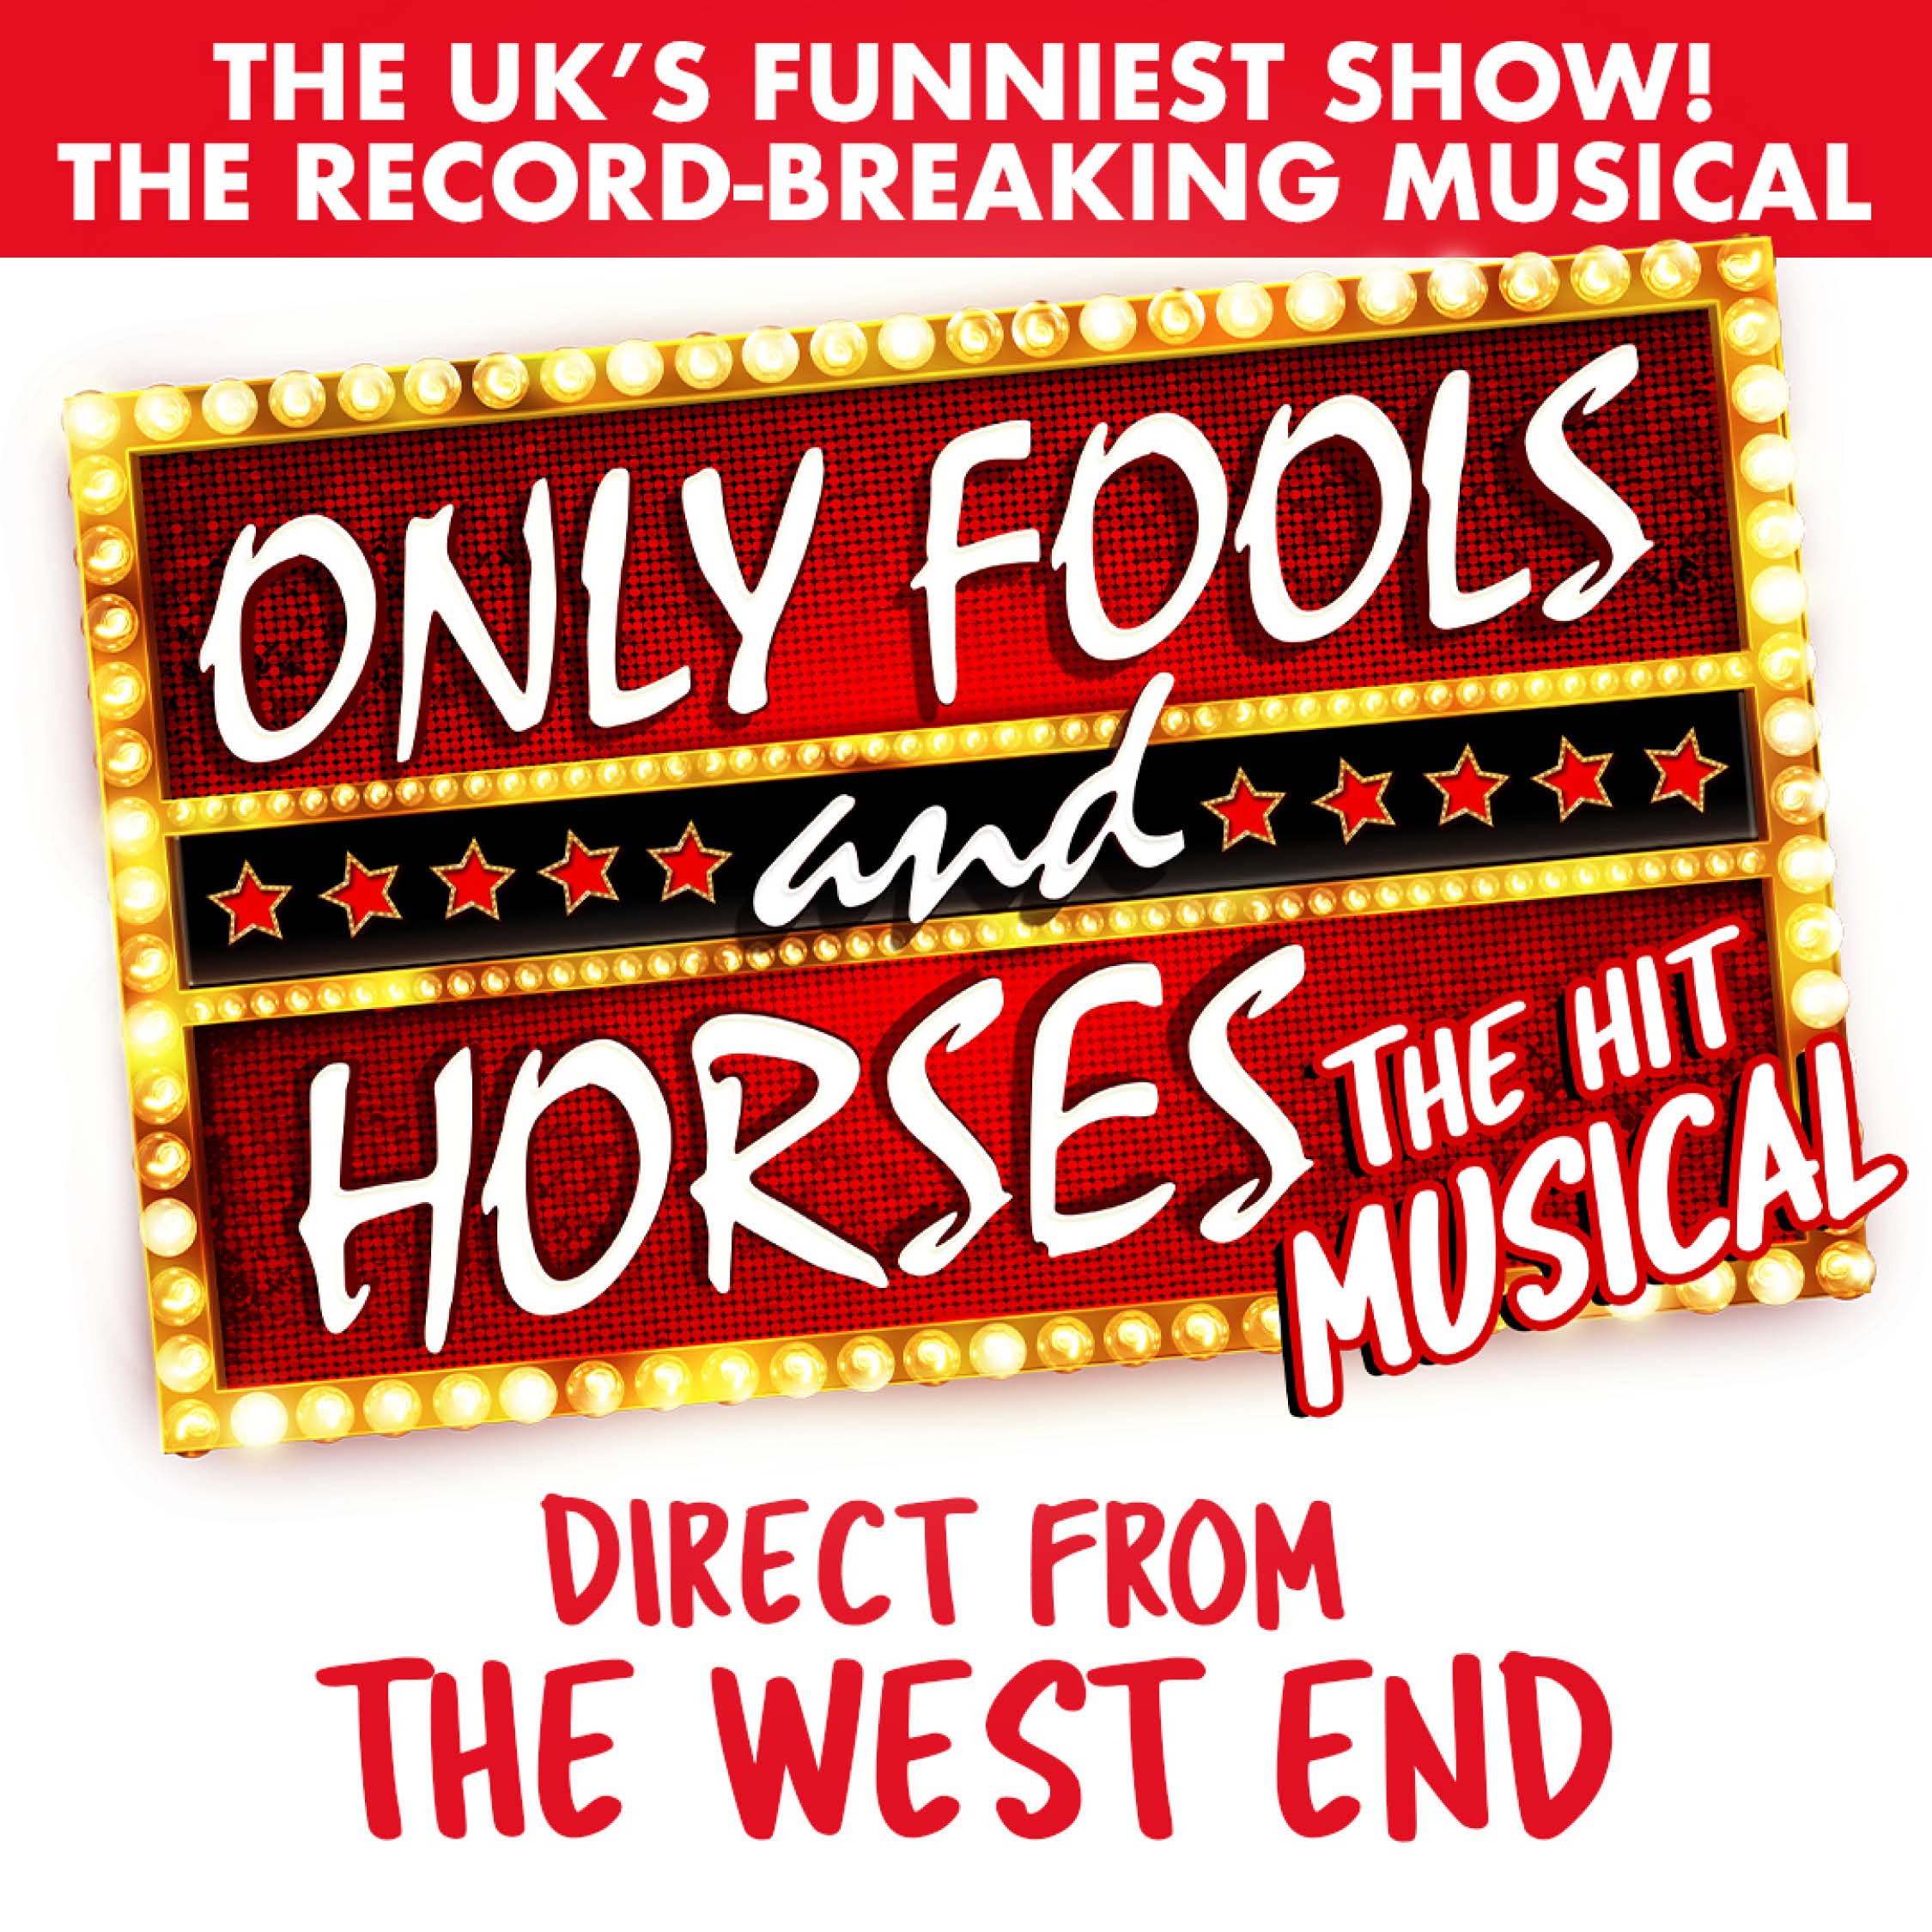 Only Fools and Horses the Musical, Blackpool